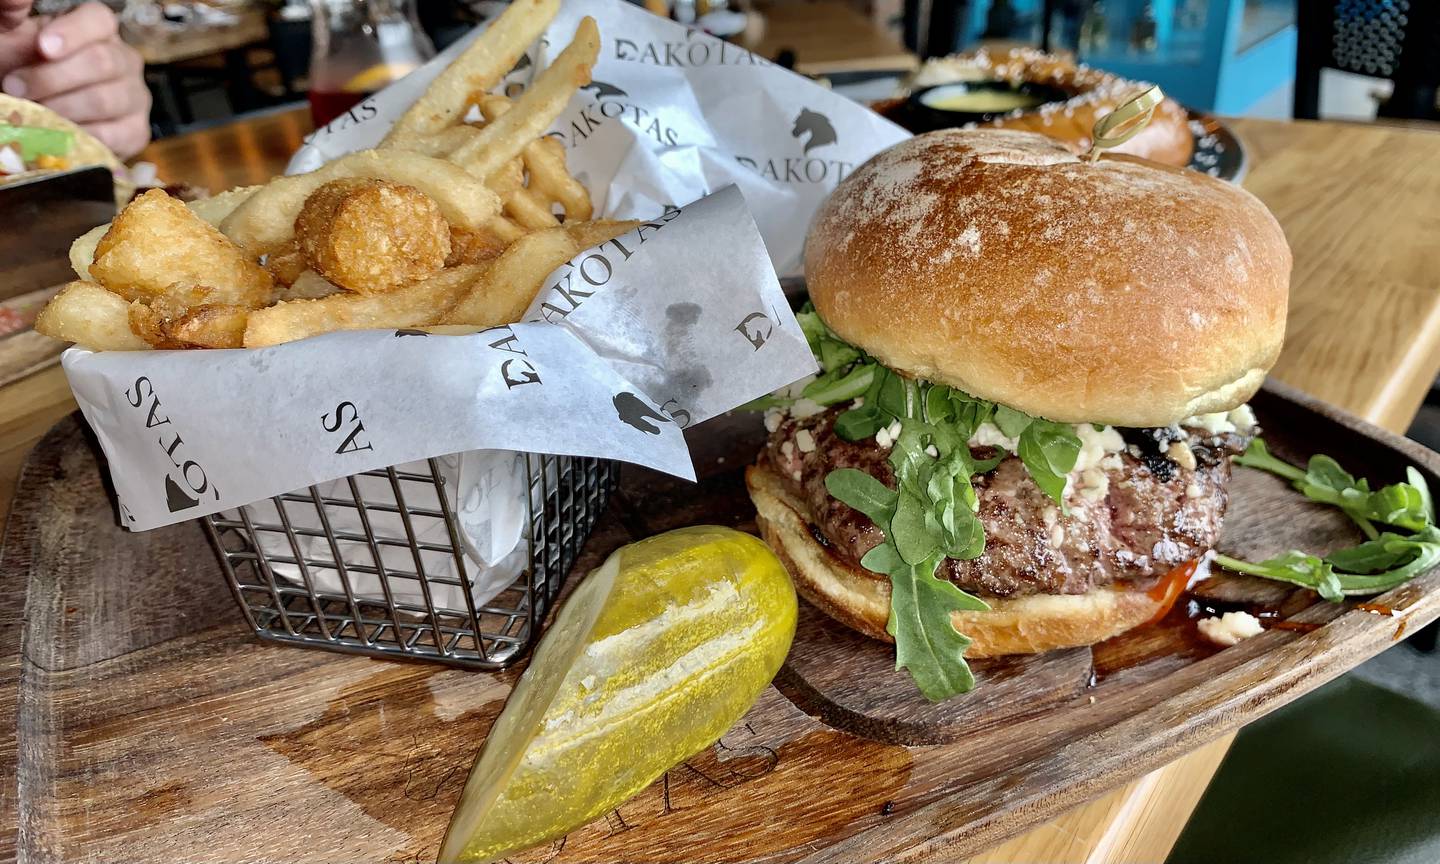 The truffle burger is a rich and decadent plate disguised as bar food.  You won't find this burger on any other menu in Yorkville.